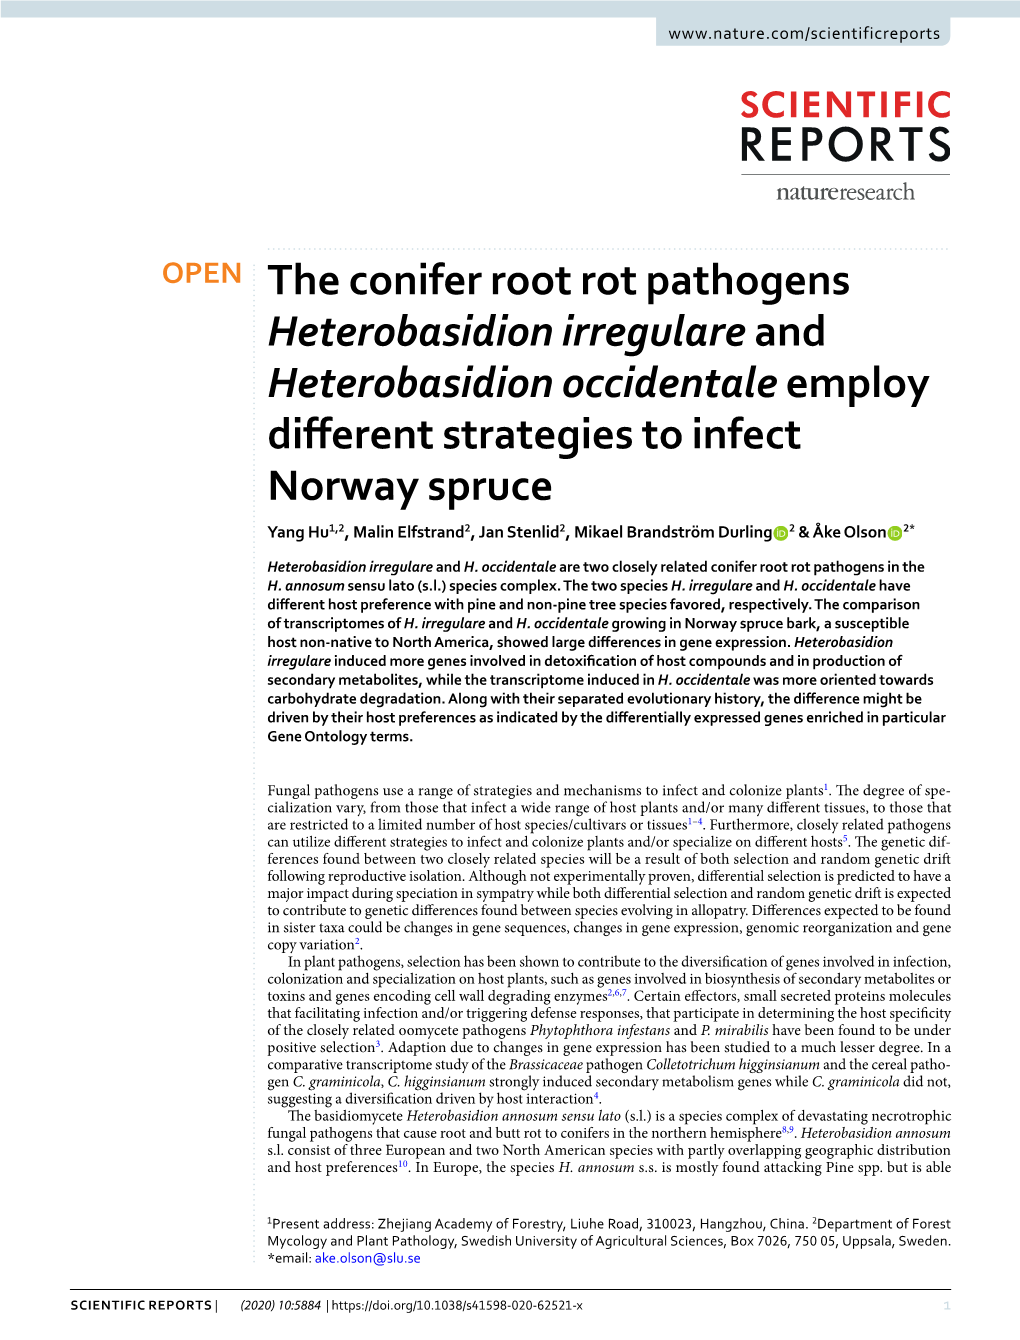 The Conifer Root Rot Pathogens Heterobasidion Irregulare And